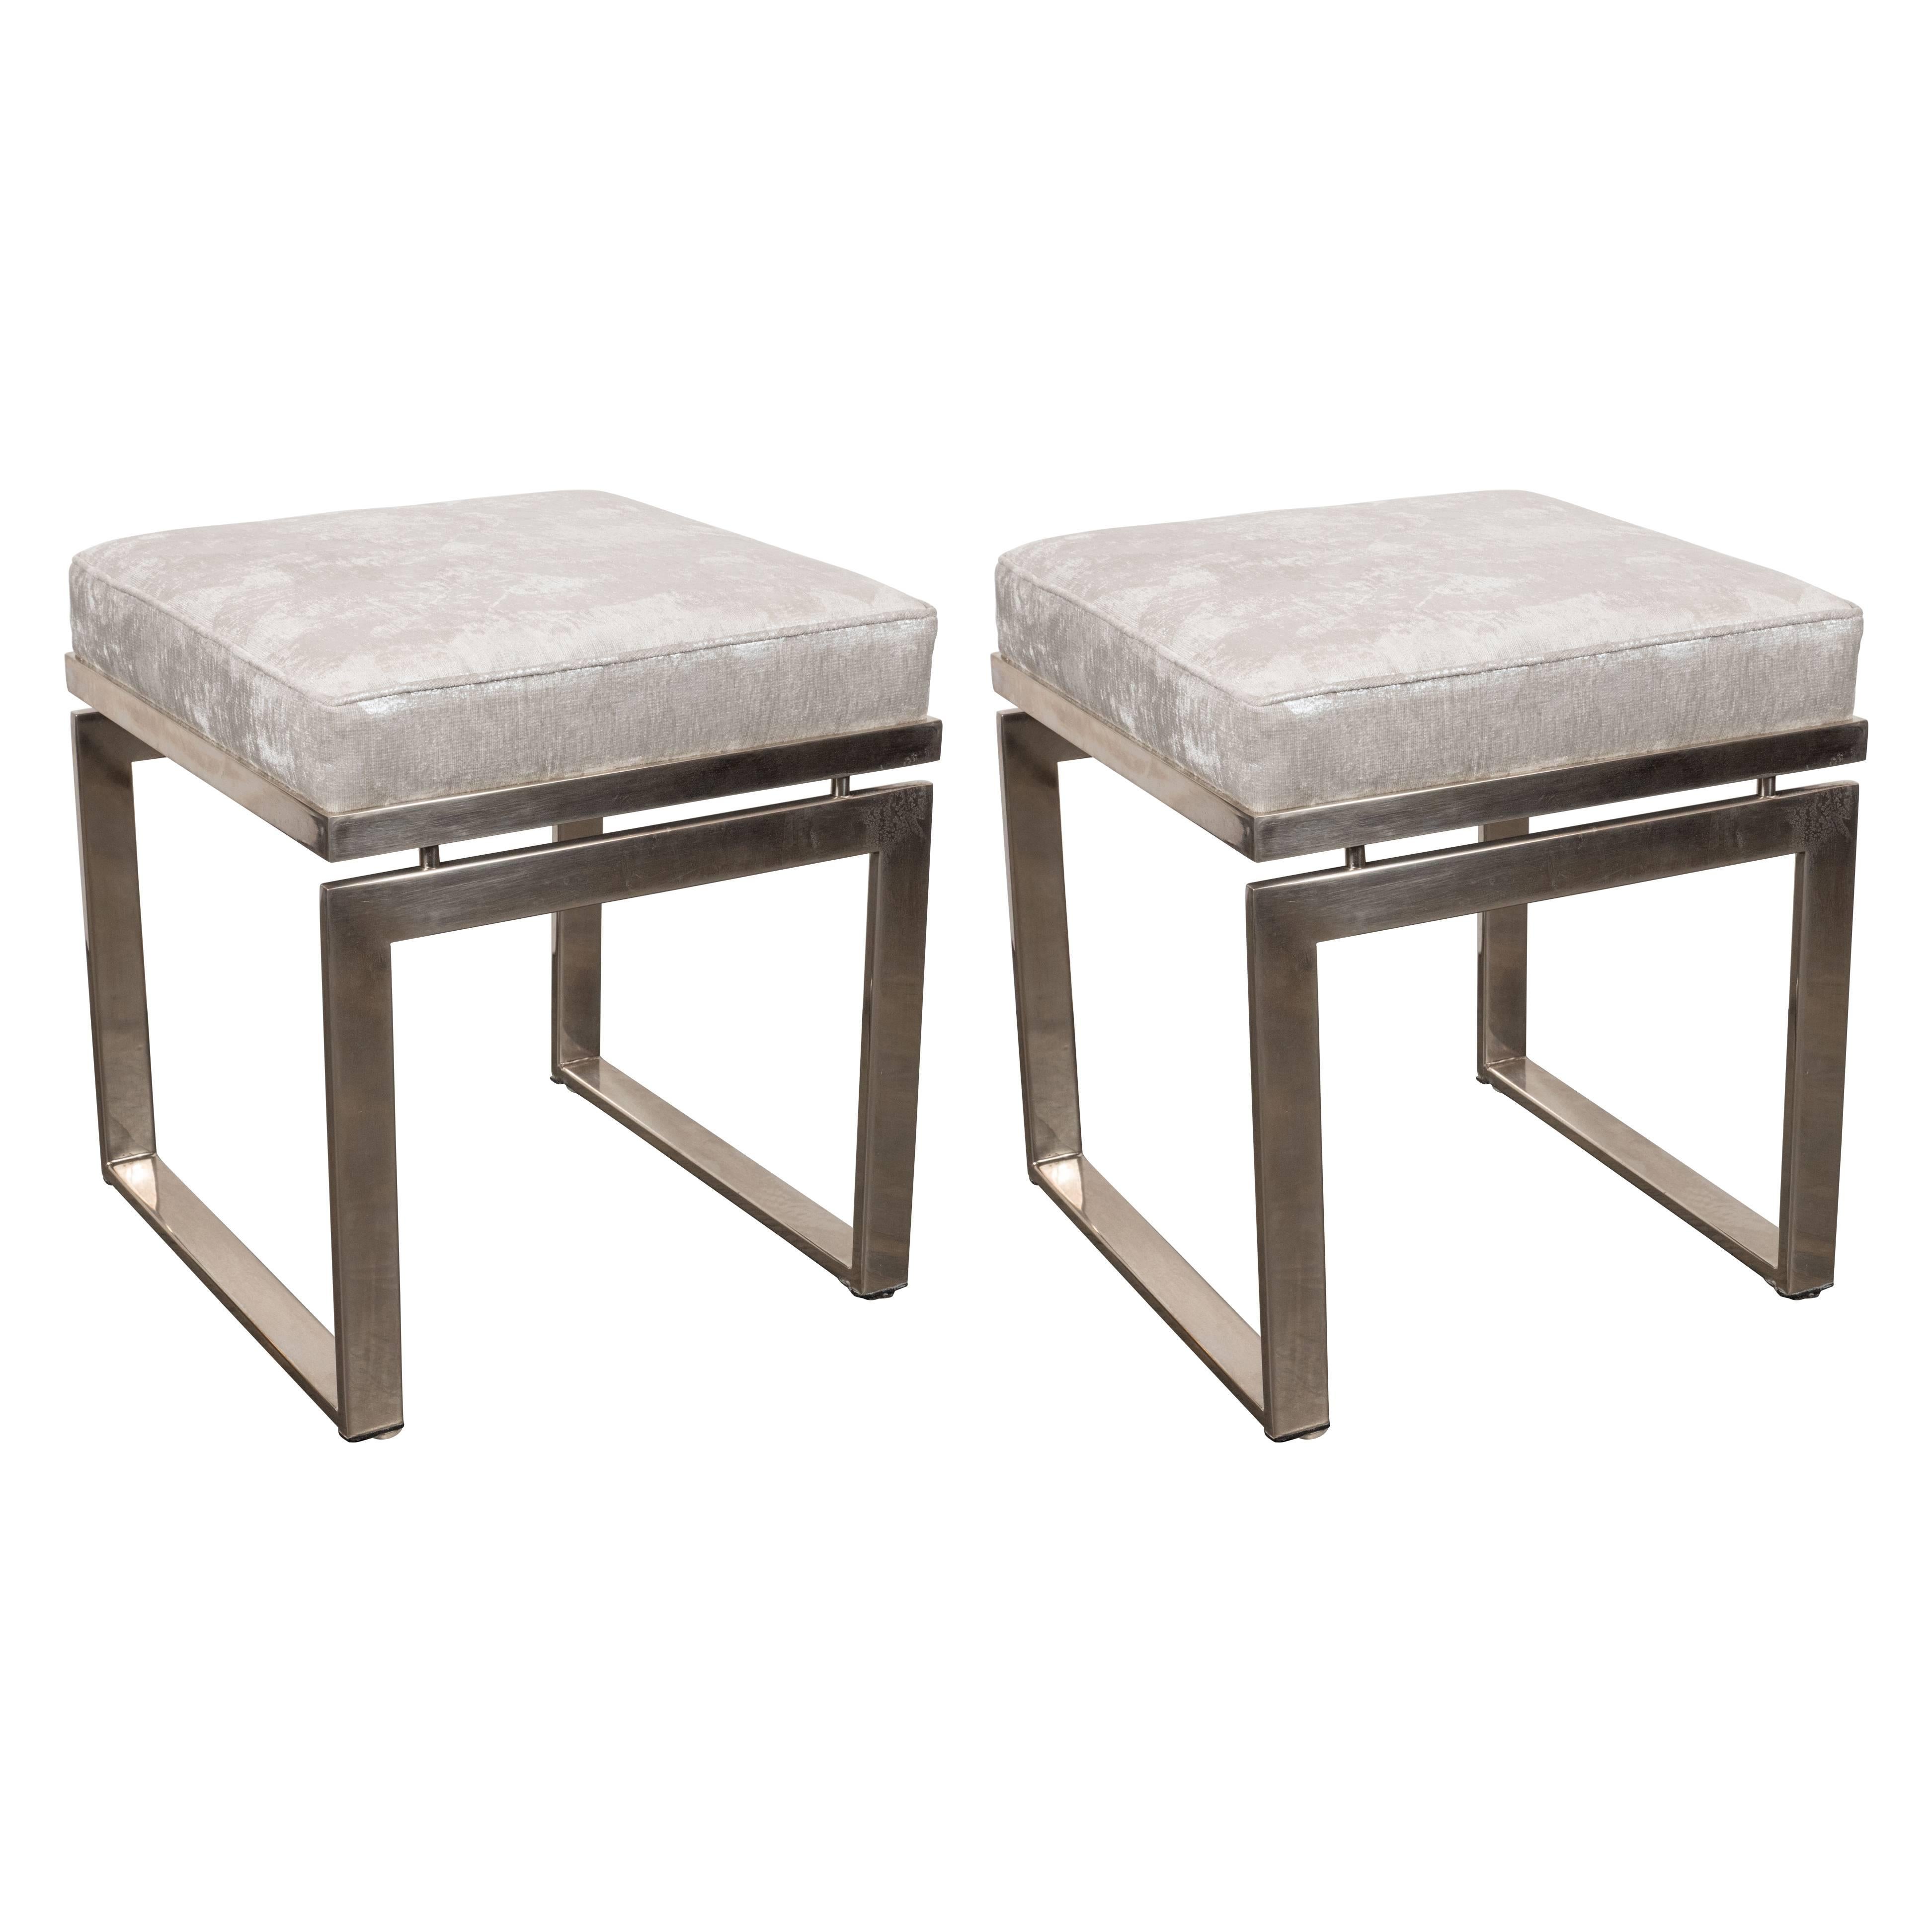 Pair of Mid-Century Modernist Chrome Stools with Textured Metallic Upholstery